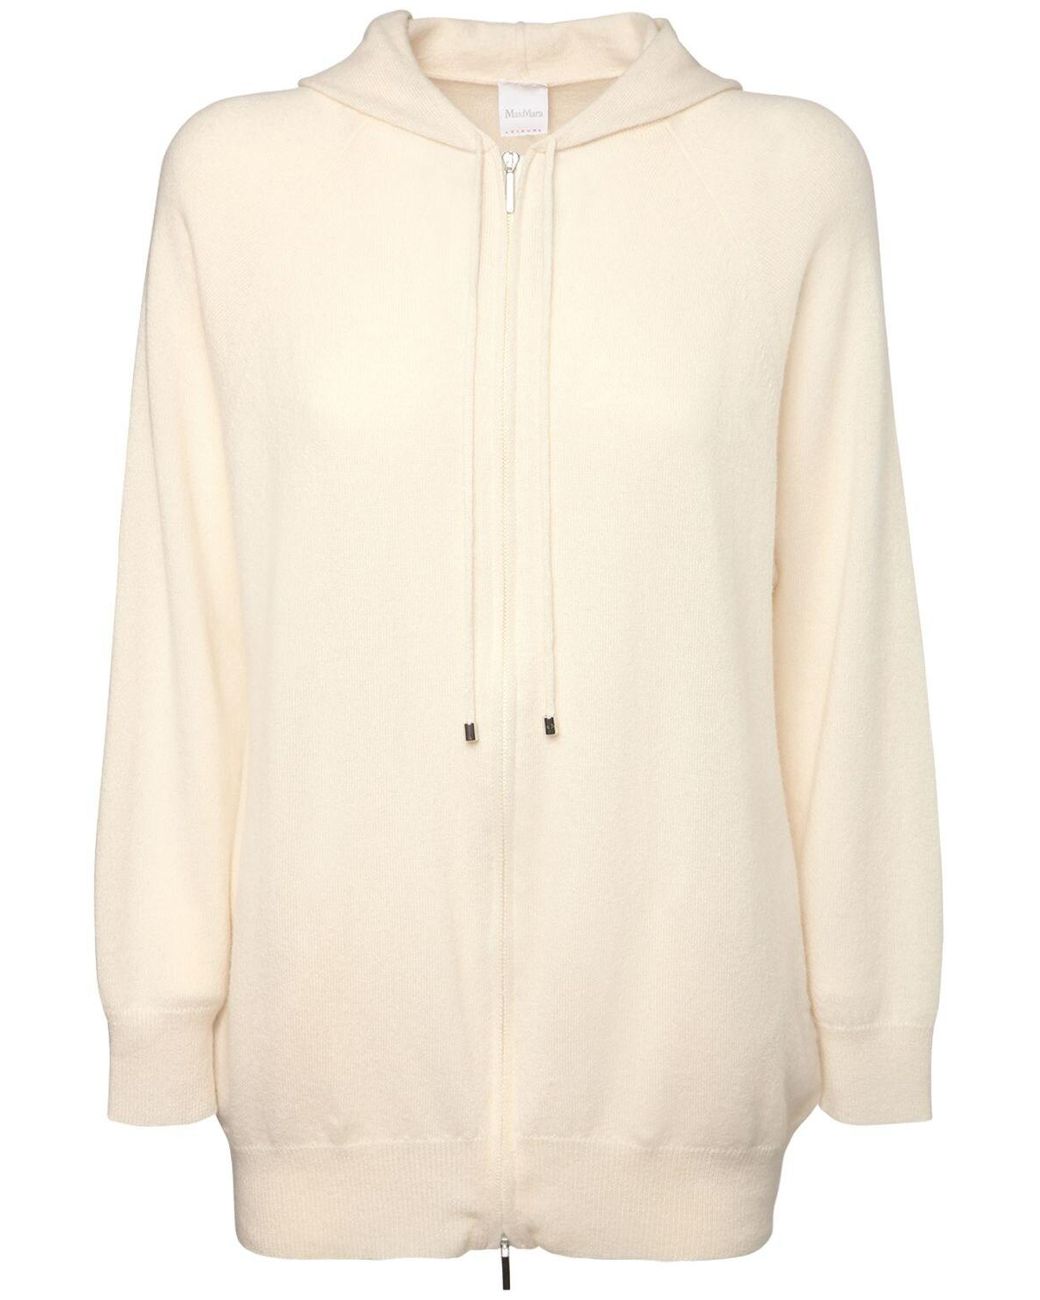 Max Mara Cashmere Knit Zip-up Hoodie in Ivory (White) - Lyst